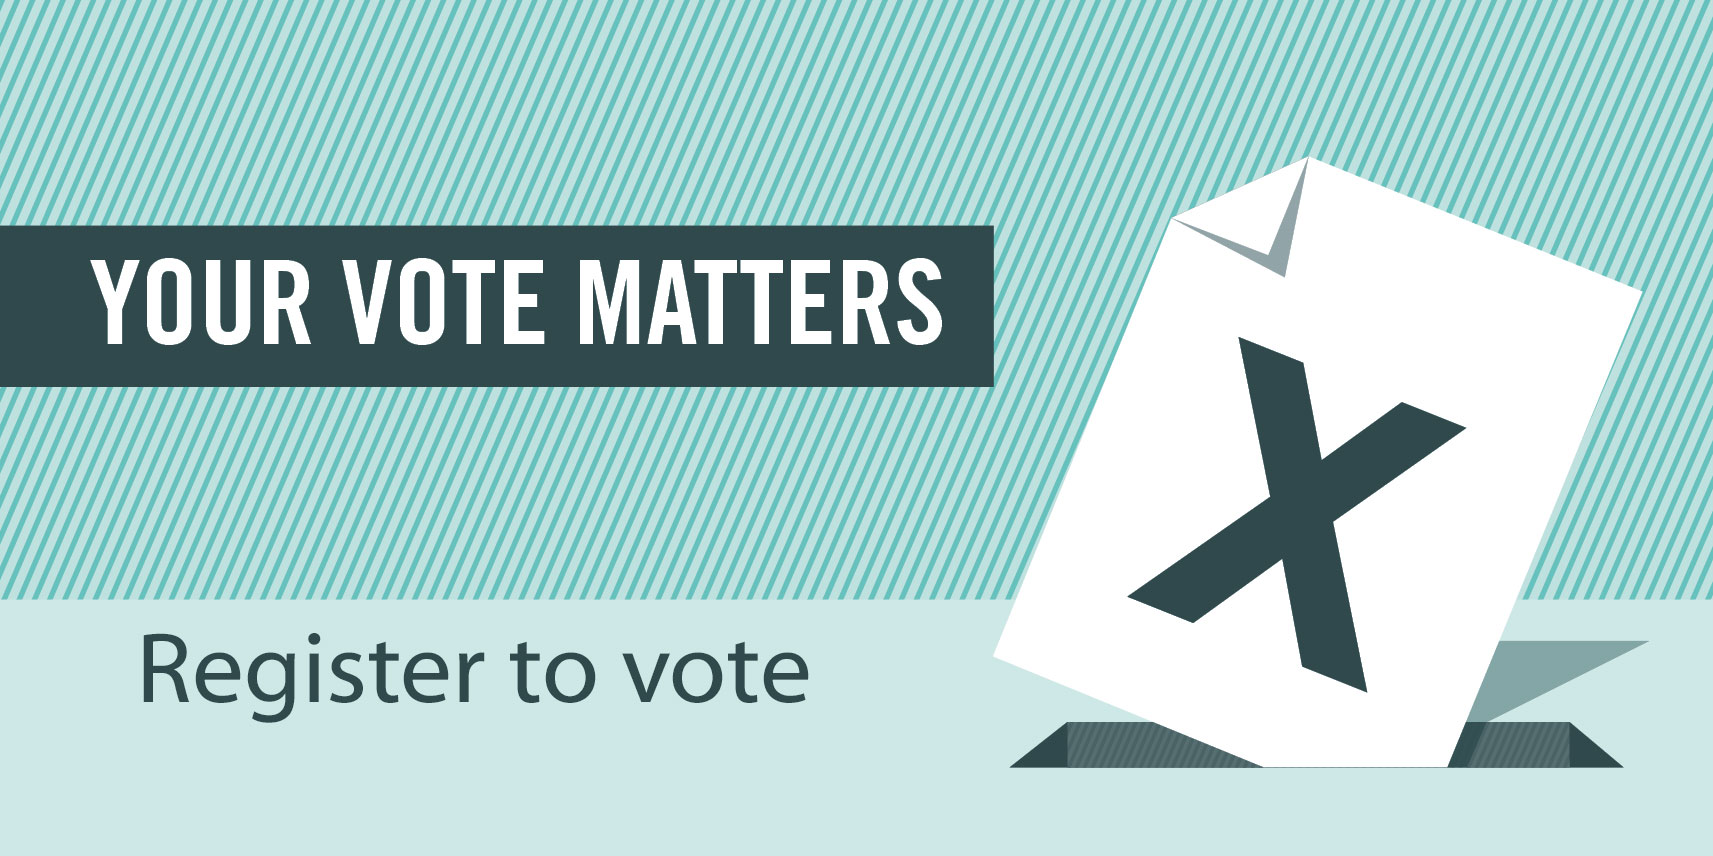 Make your mark and register to vote this Autumn!